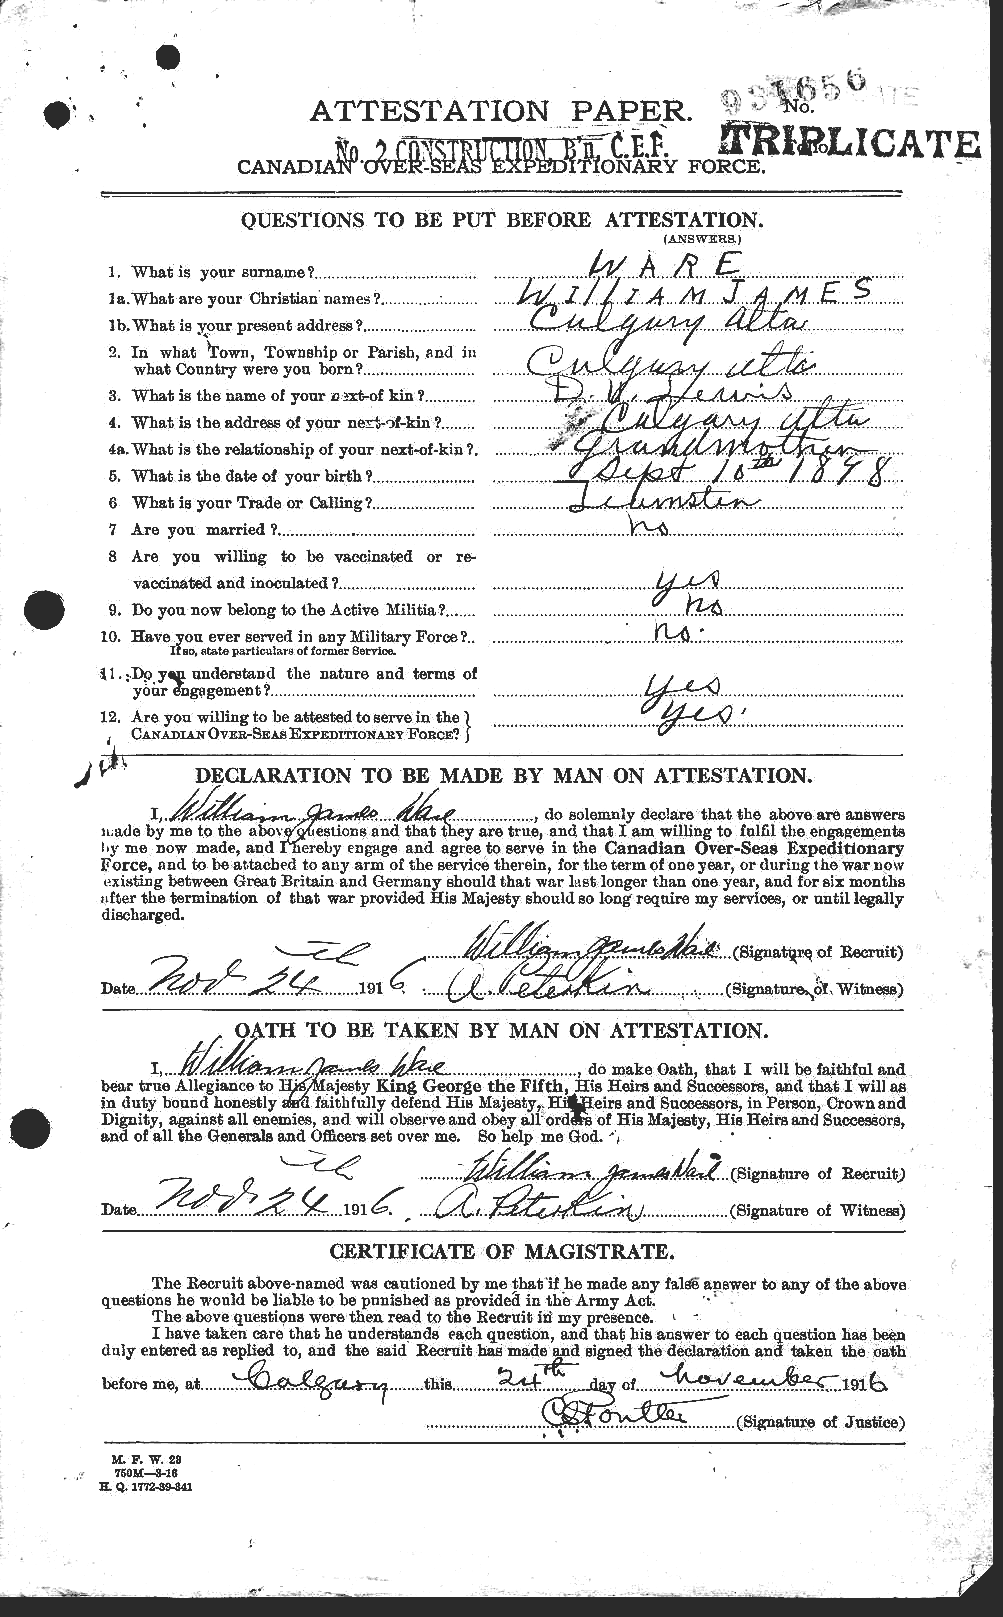 Personnel Records of the First World War - CEF 656290a